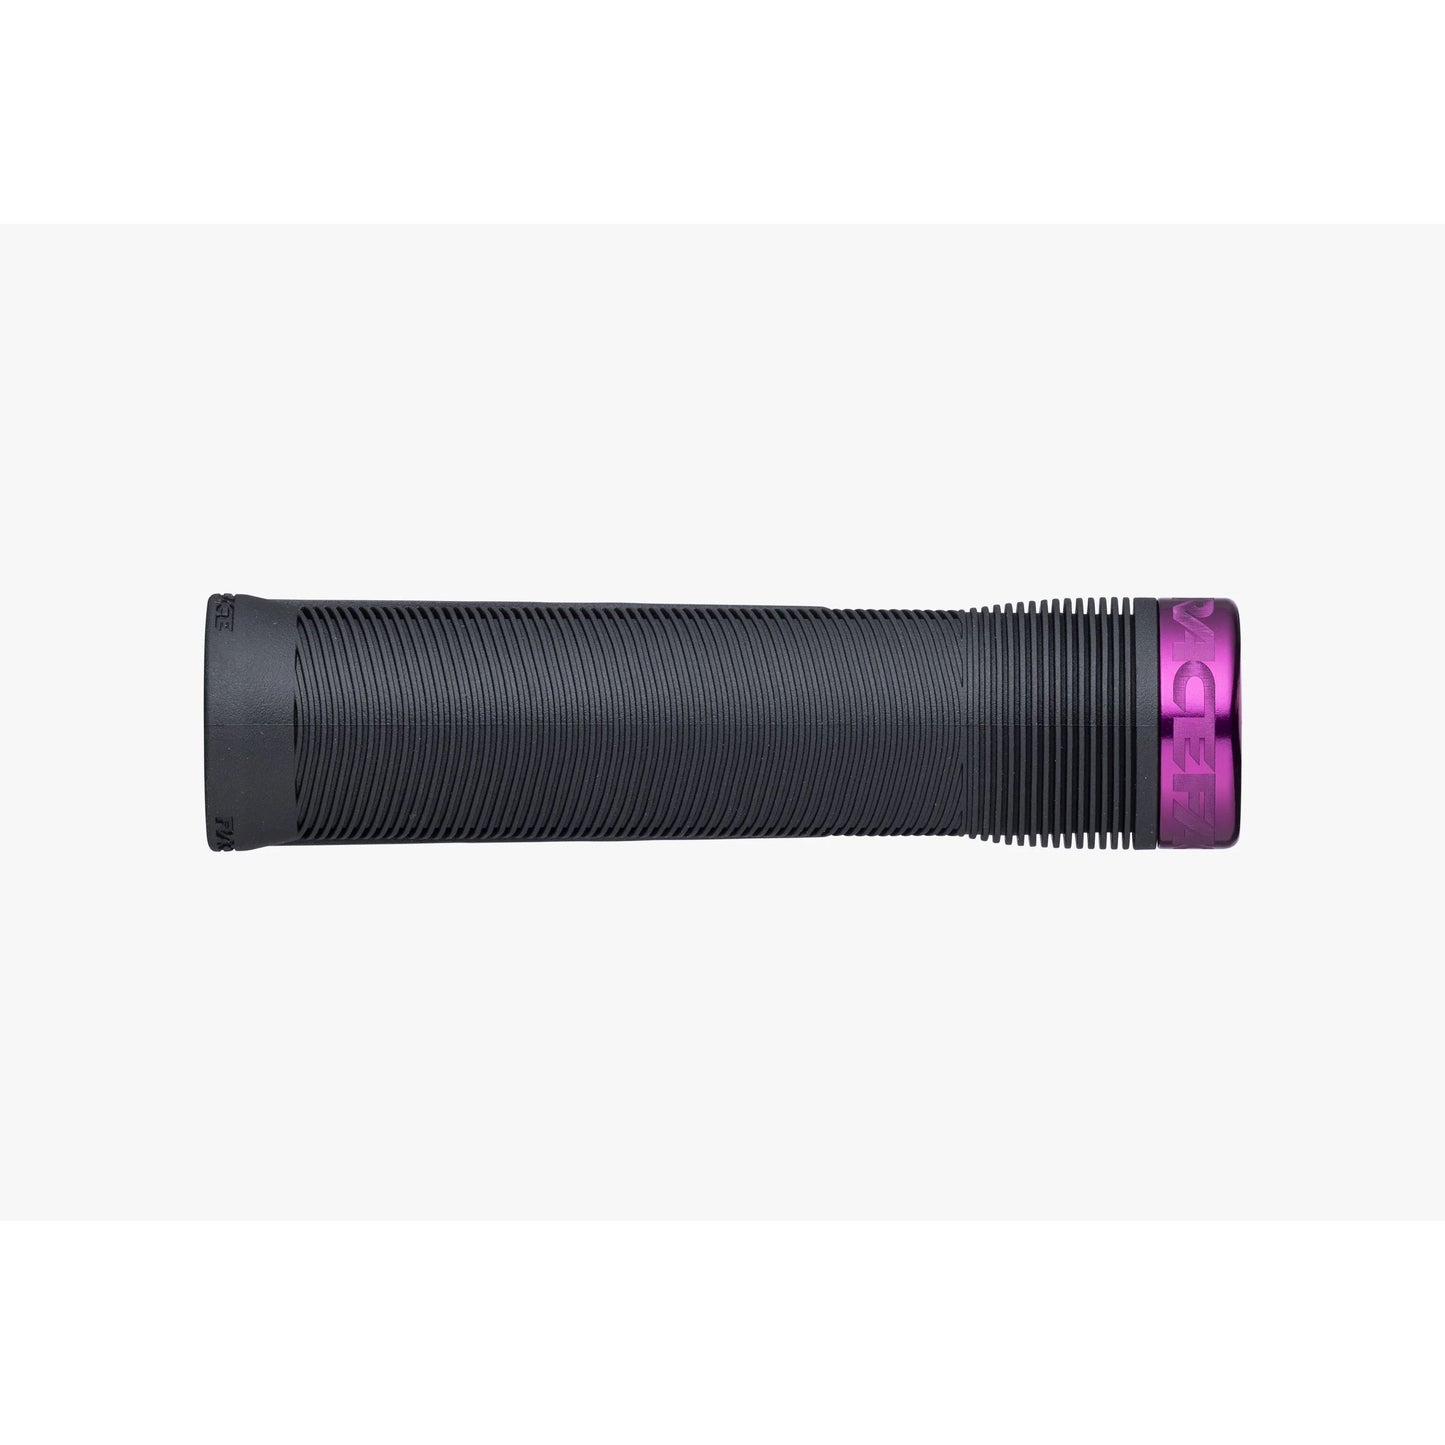 Race Face Chester Lock On Grips - Black With Purple Clamps - Single Lock On Grips - 31mm